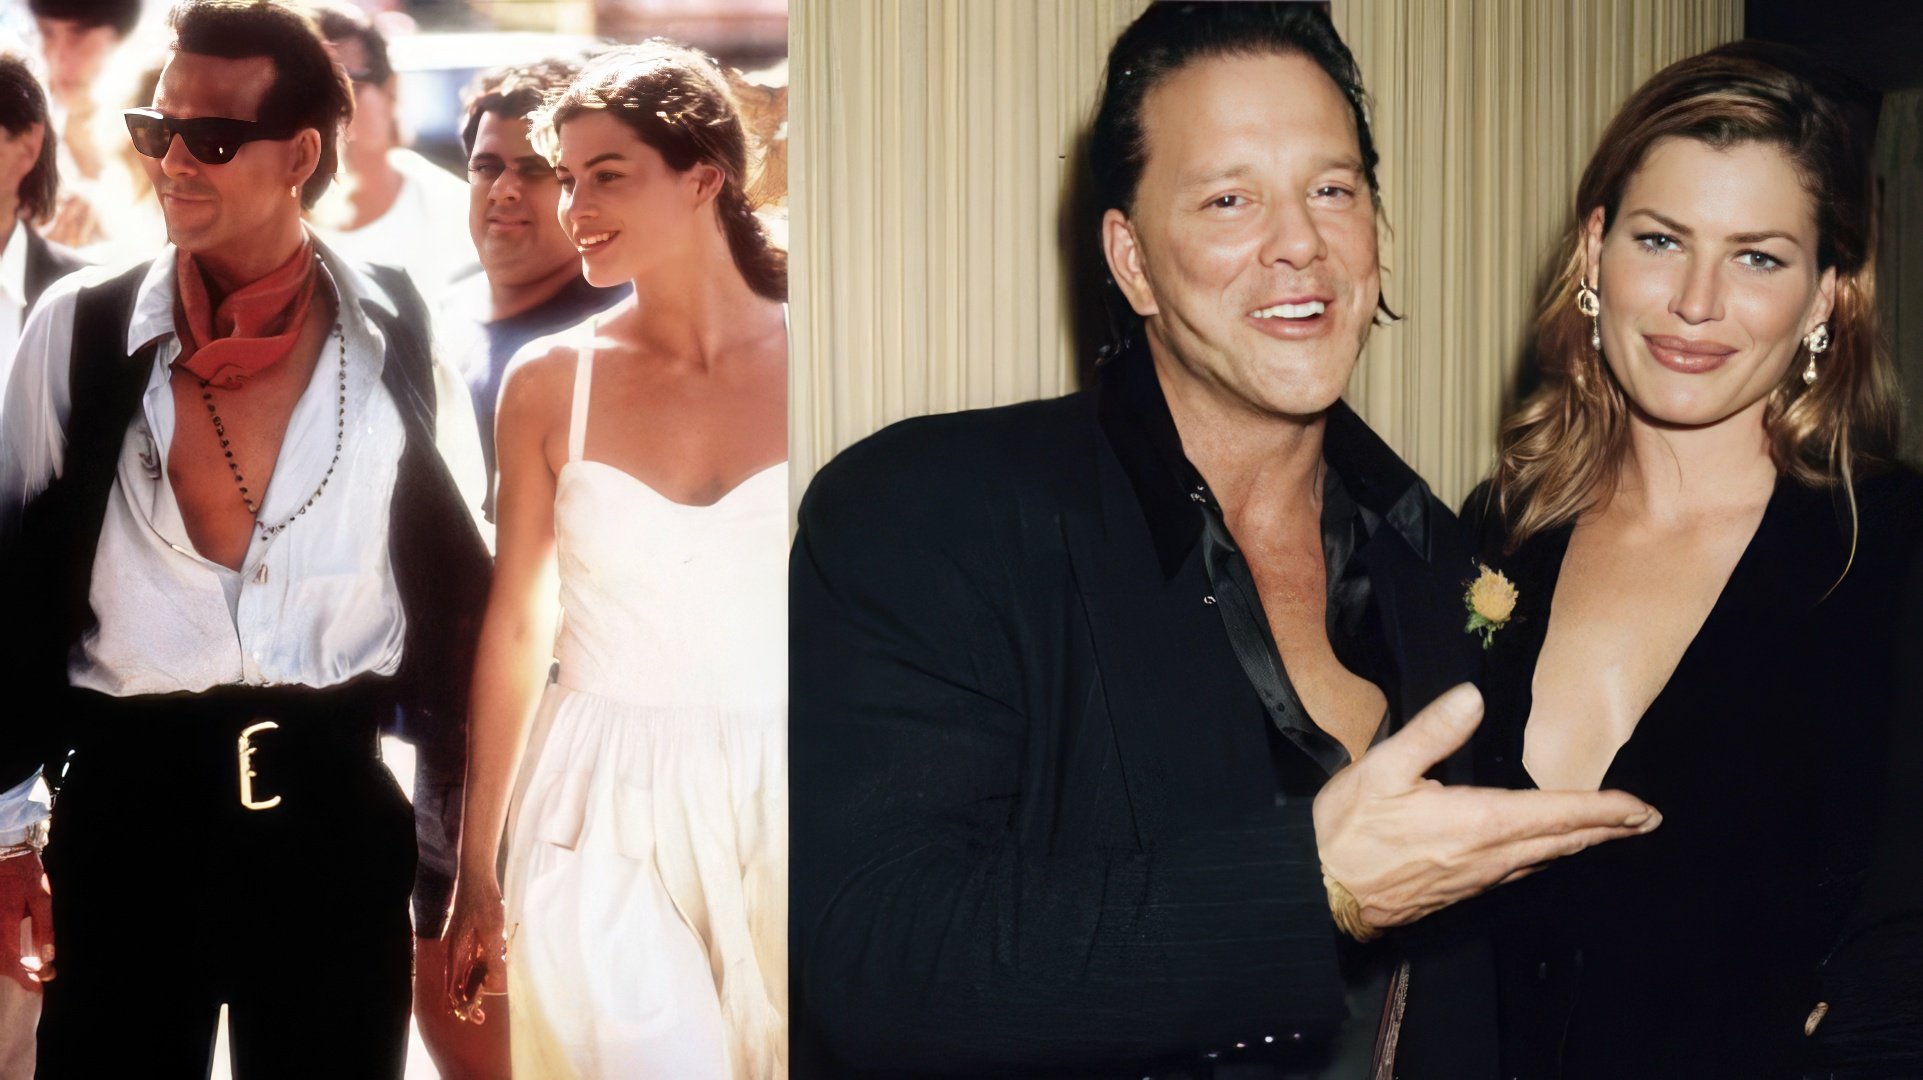 Mickey Rourke and Carré Otis